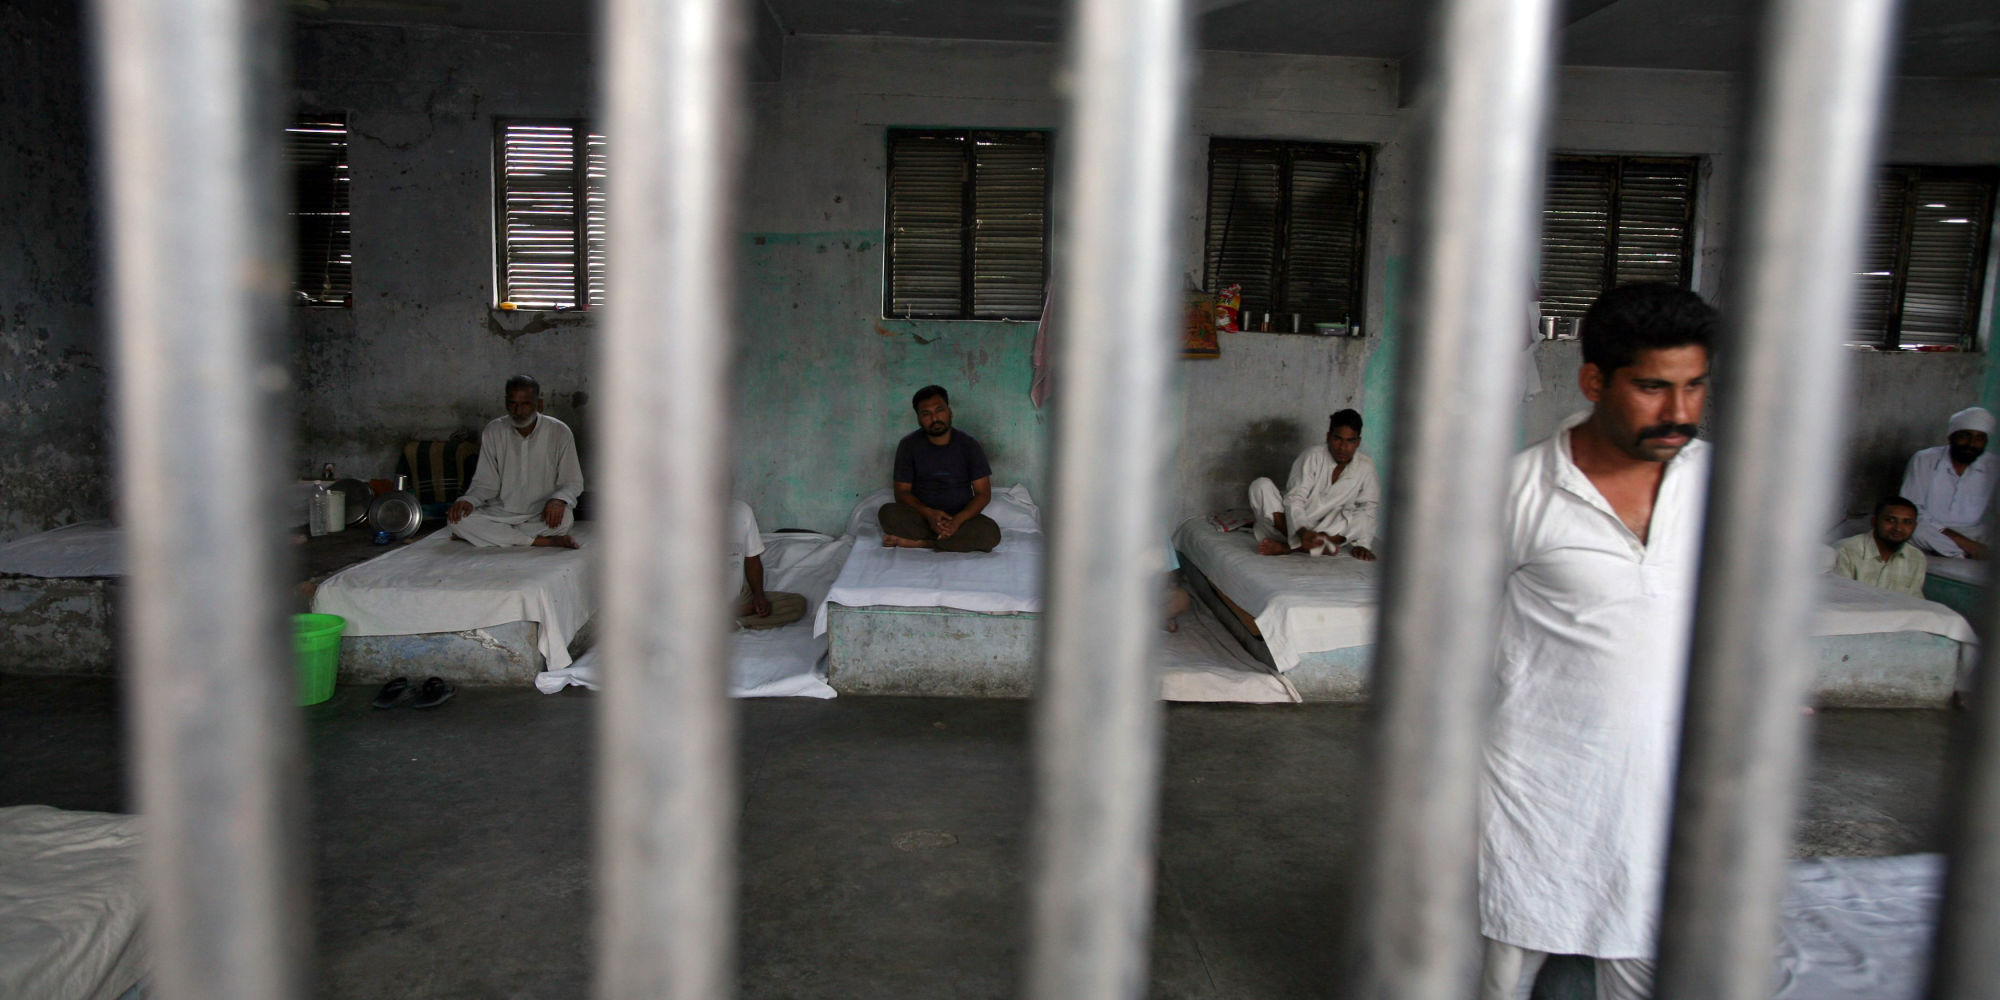 Inmates rest behind bars in a barrack at Kotbhalwal central jail in Jammu May 18, 2011. Jail authorities have formed a 20-member pipe band of a team of prisoners who are being trained to play and perform musical instruments. Once the band is ready, they will be sent to perform at weddings and other social functions, a jail superintendent said. The main aim of creating the pipe band is to develop relations of these prisoners with the rest of the outside world and to involve them in various social functions so as to change their mindset, the superintendent added. Picture taken May 18, 2011. REUTERS/Mukesh Gupta (INDIAN-ADMINISTERED KASHMIR - Tags: CRIME LAW SOCIETY ENTERTAINMENT)